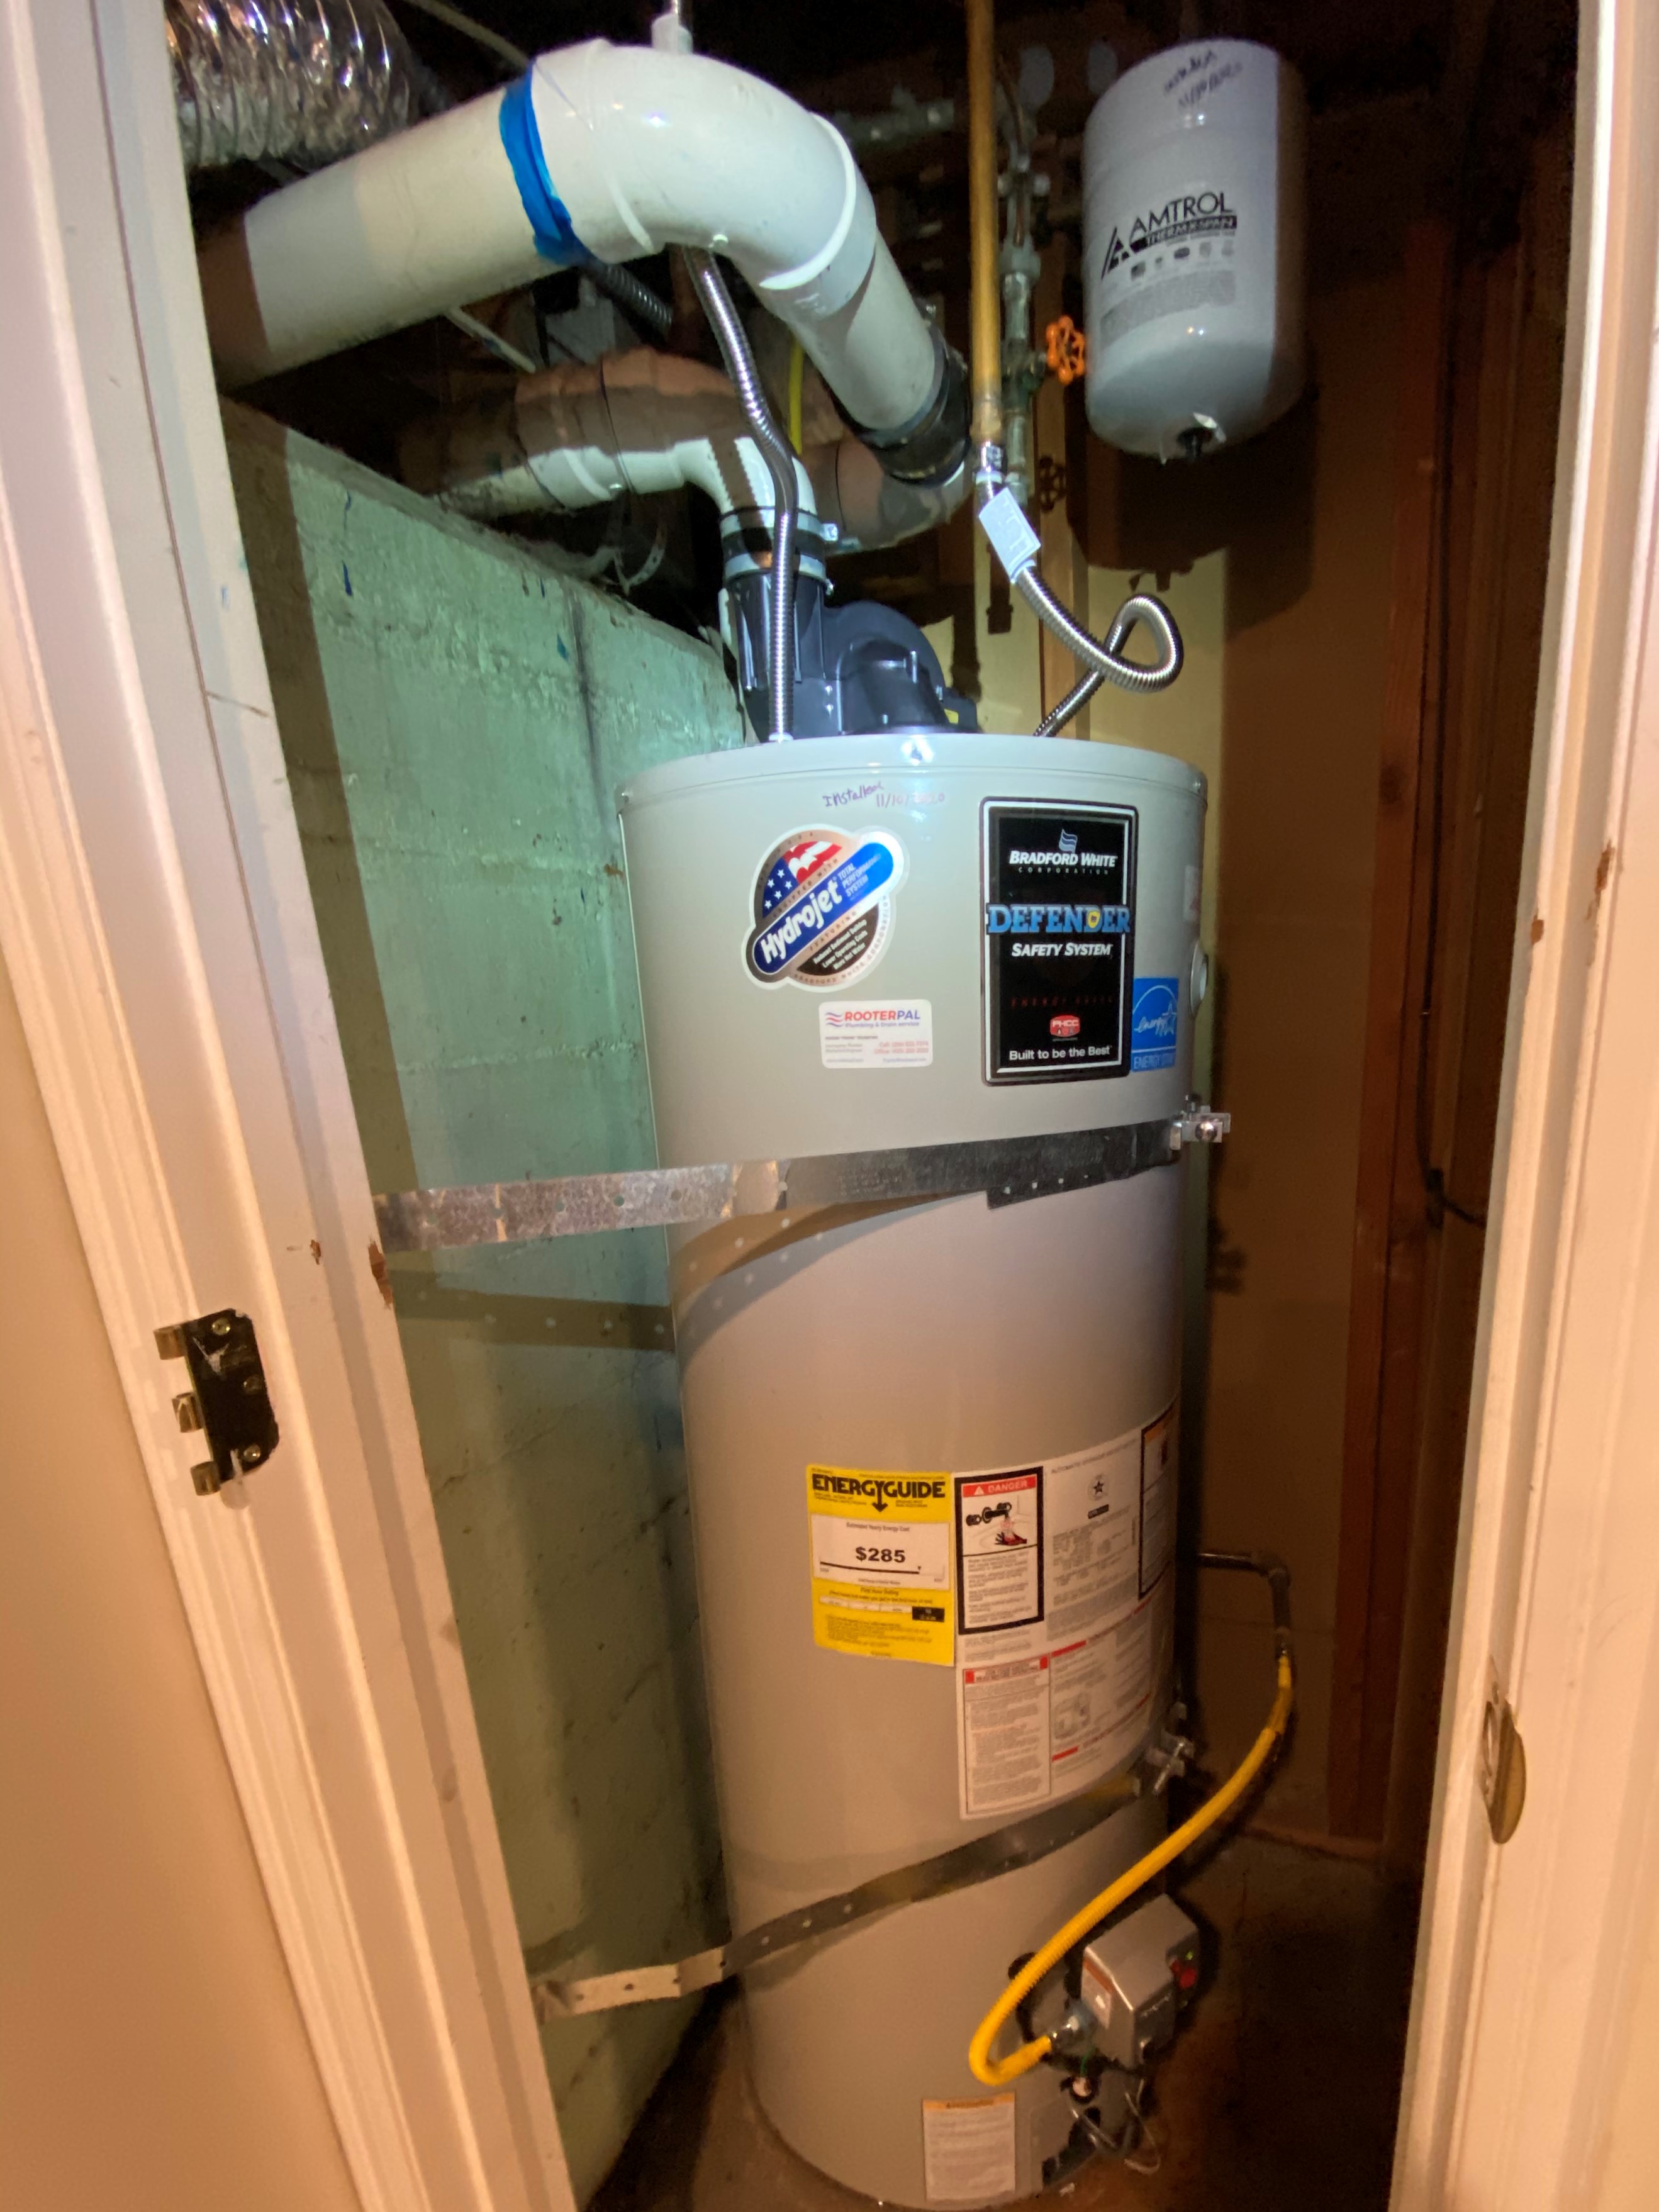 Direct Power vent water heater